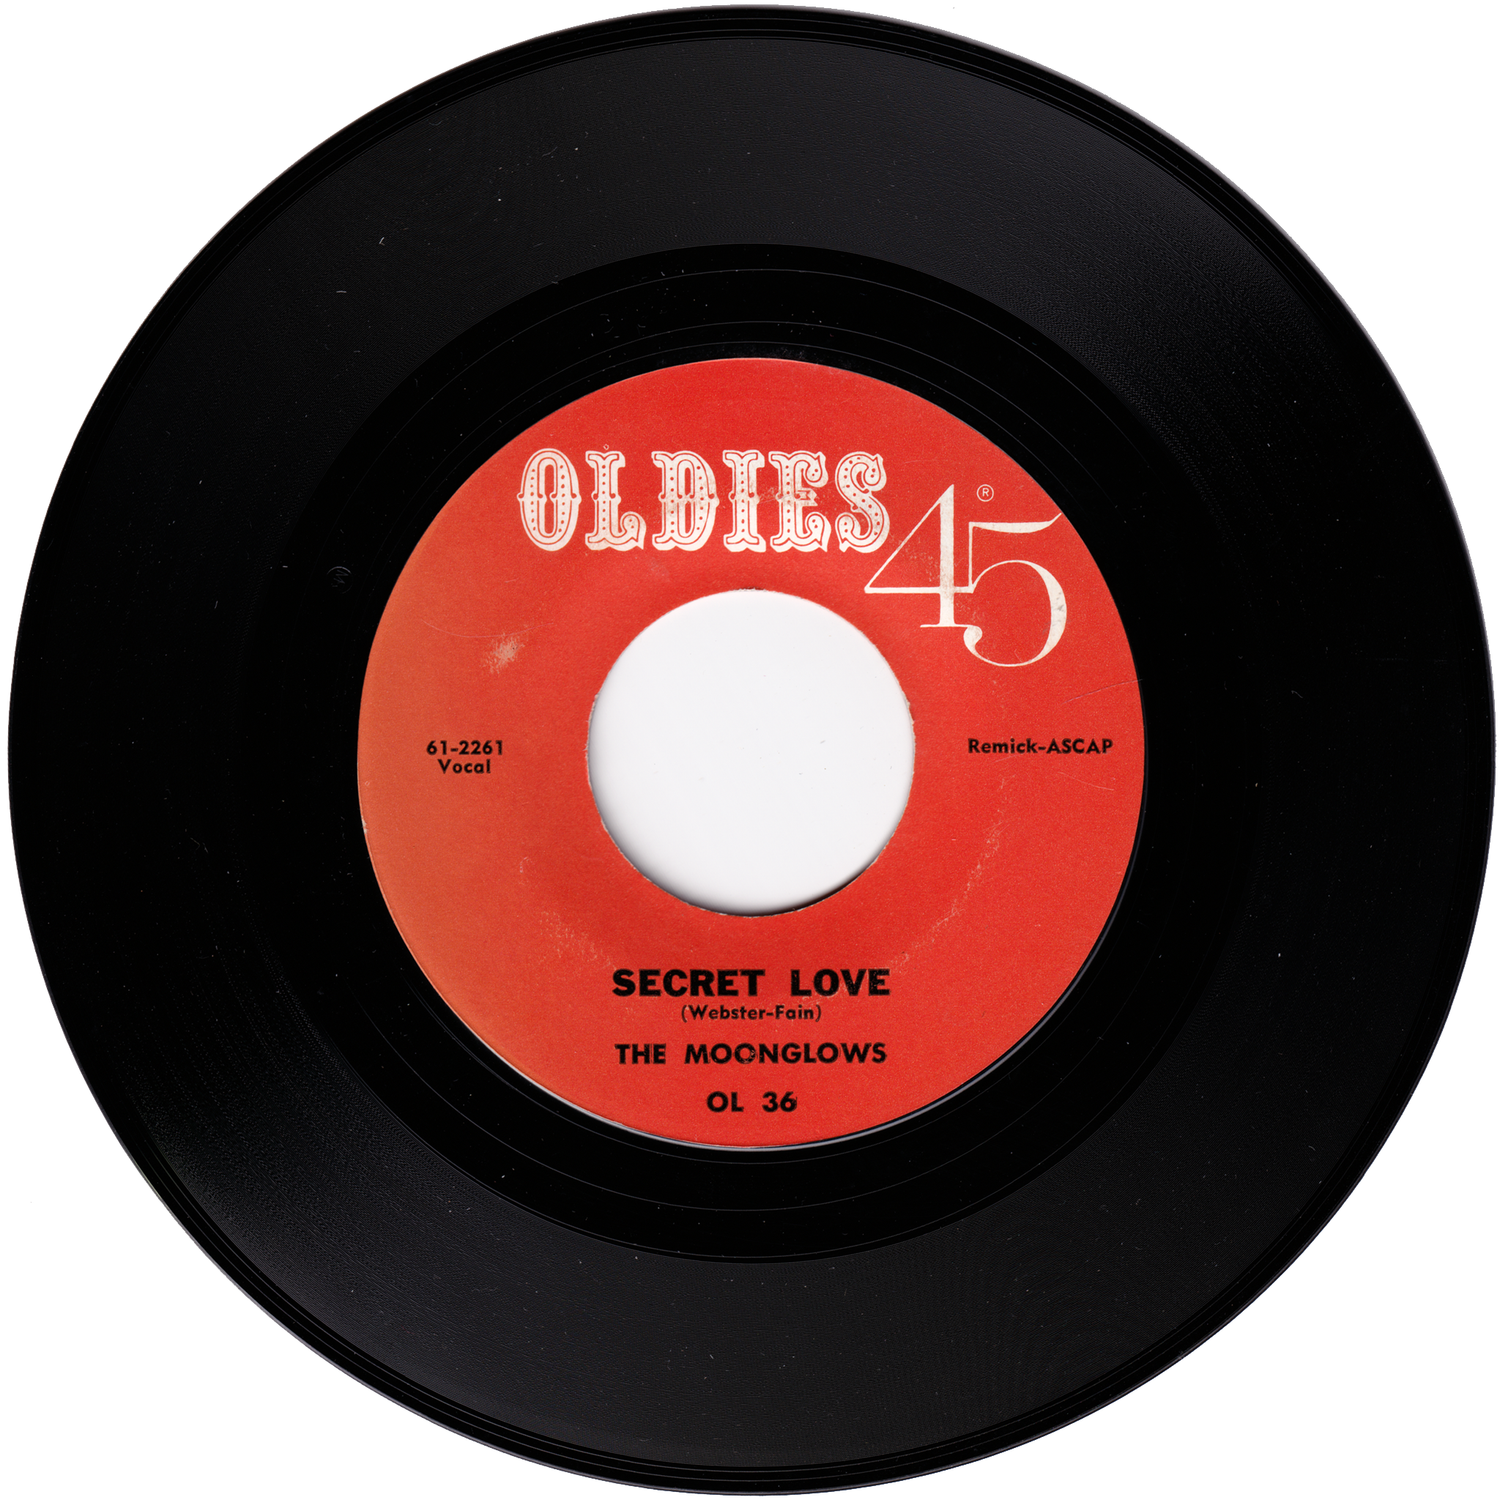 Gone　BEAT　Secret　The　(OLDIES45　Mama　Re-Issue)　NIGHT　Moonglows　–　Love　Real　RECORDS